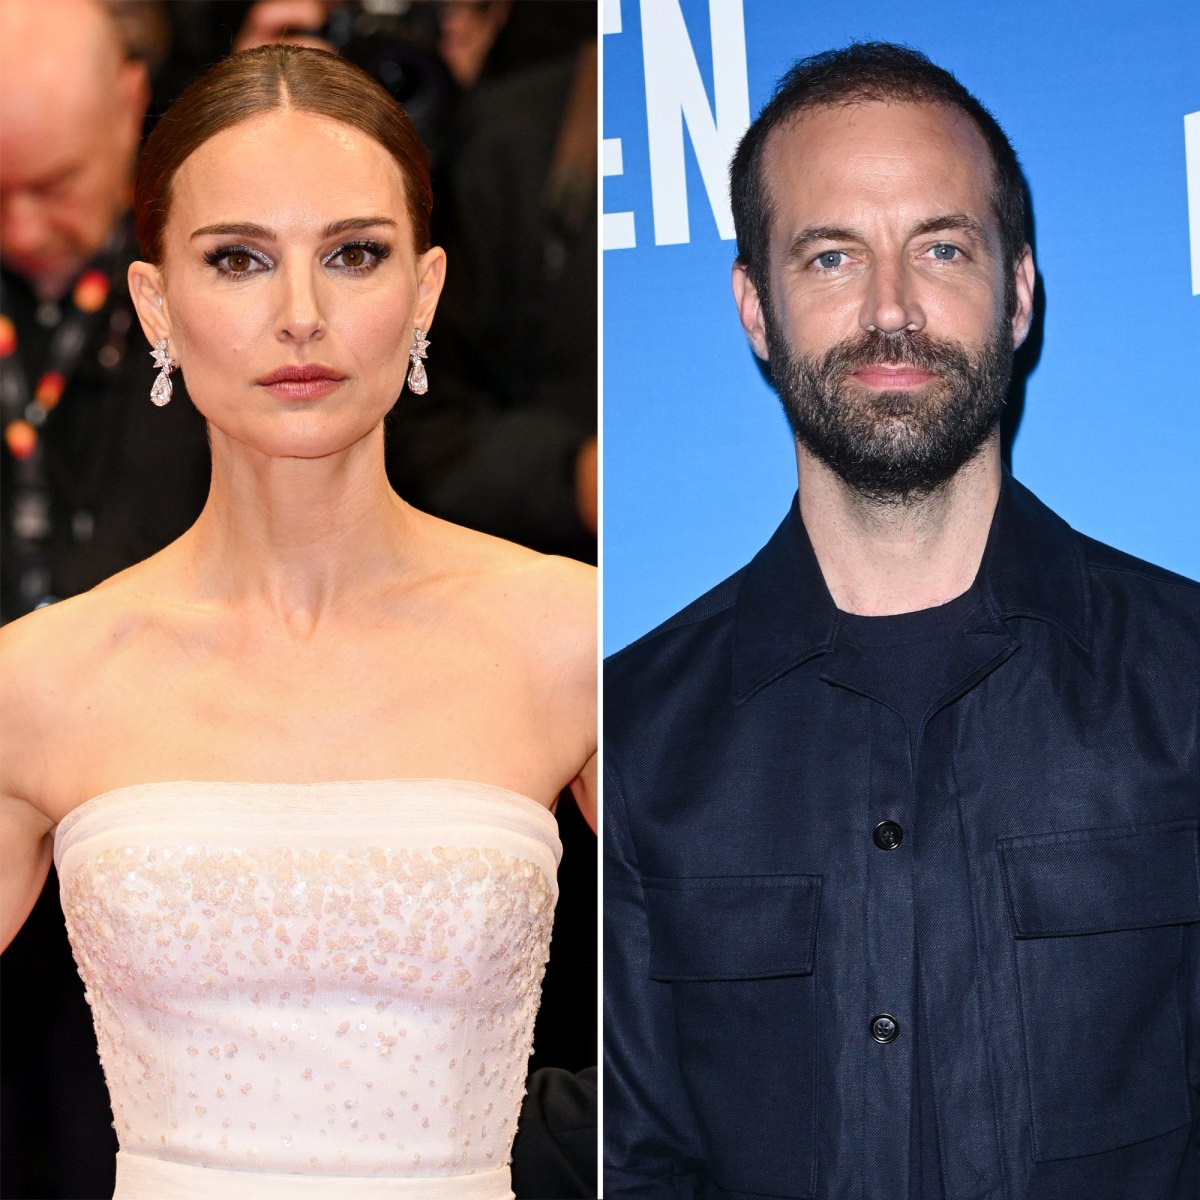 Natalie Portman and Benjamin Millepied Are Separated After His Affair